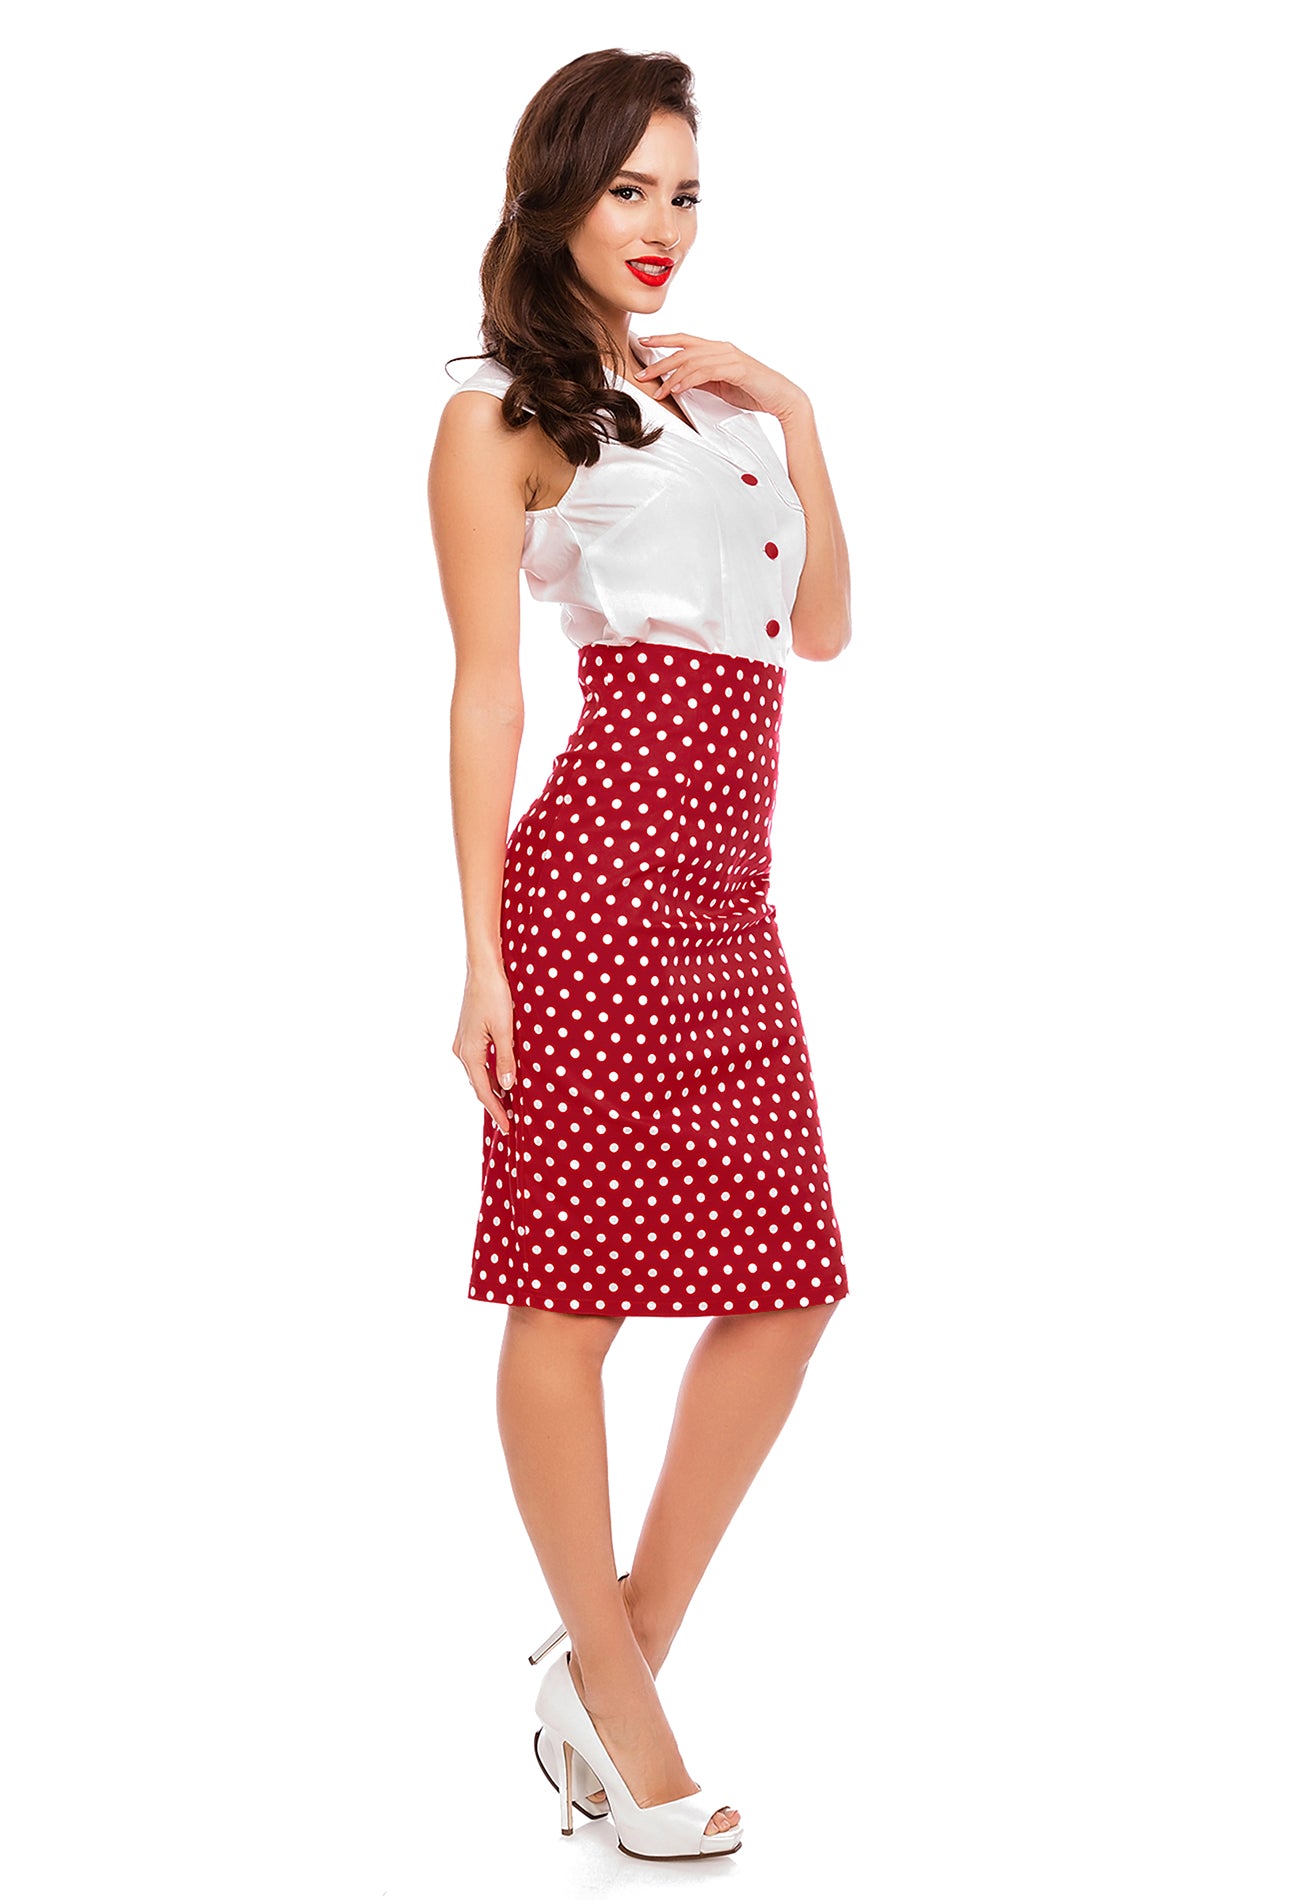 Model wearing our red and white polka dot pencil Falda skirt, with white top, side view